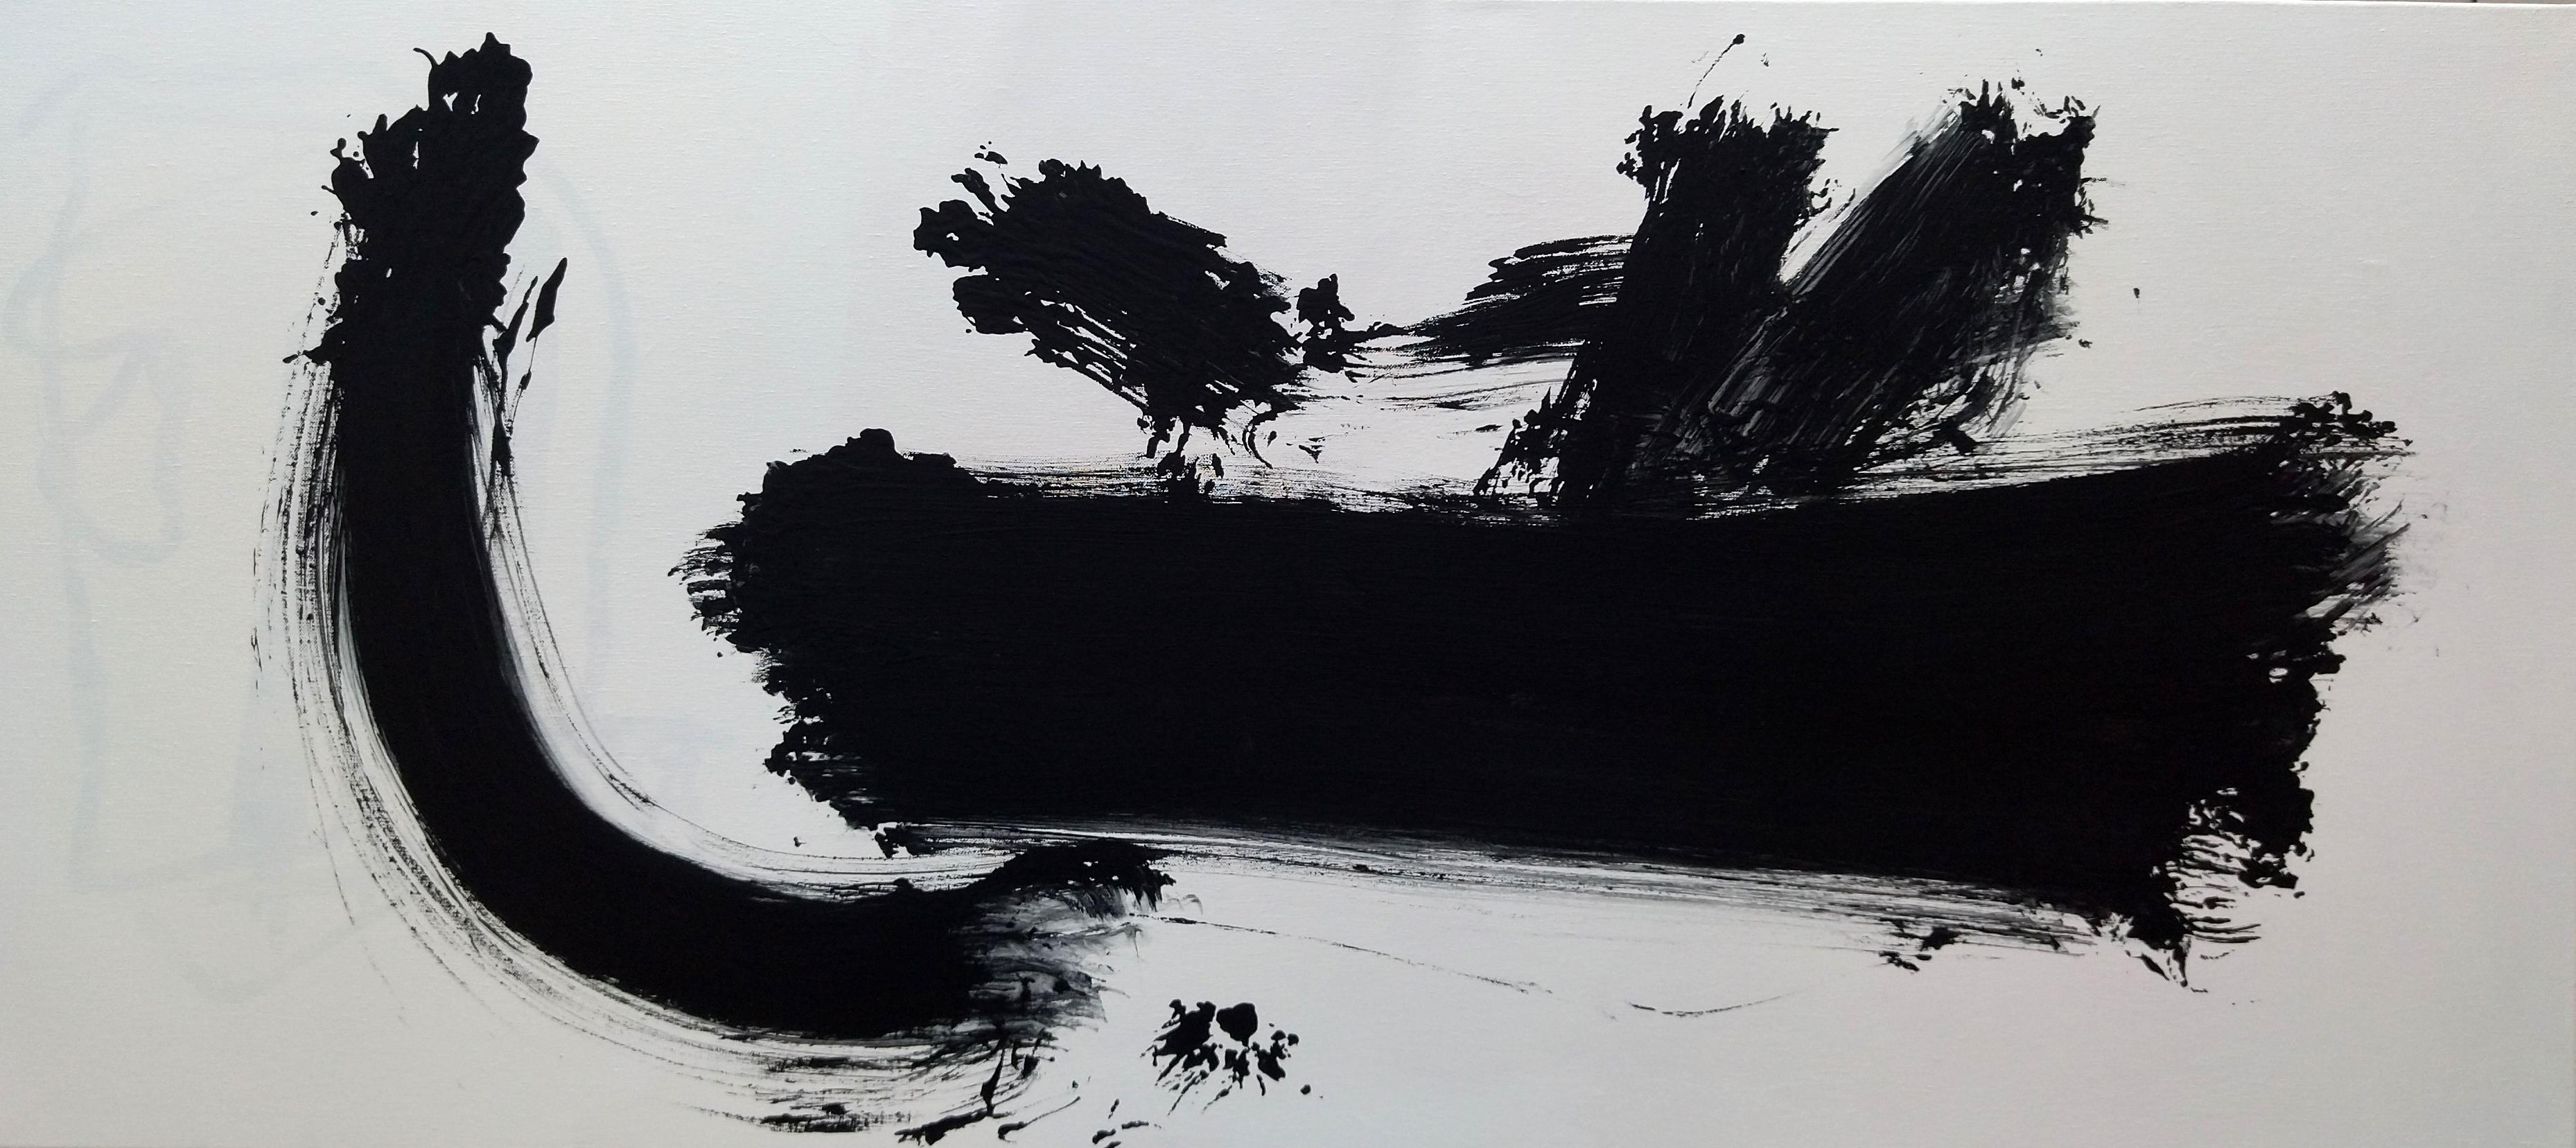 RAFAEL RUZ Abstract Painting -  Ruz  Black White  Que Lejos. Landscapes -  Abstract Acrylic  Painting